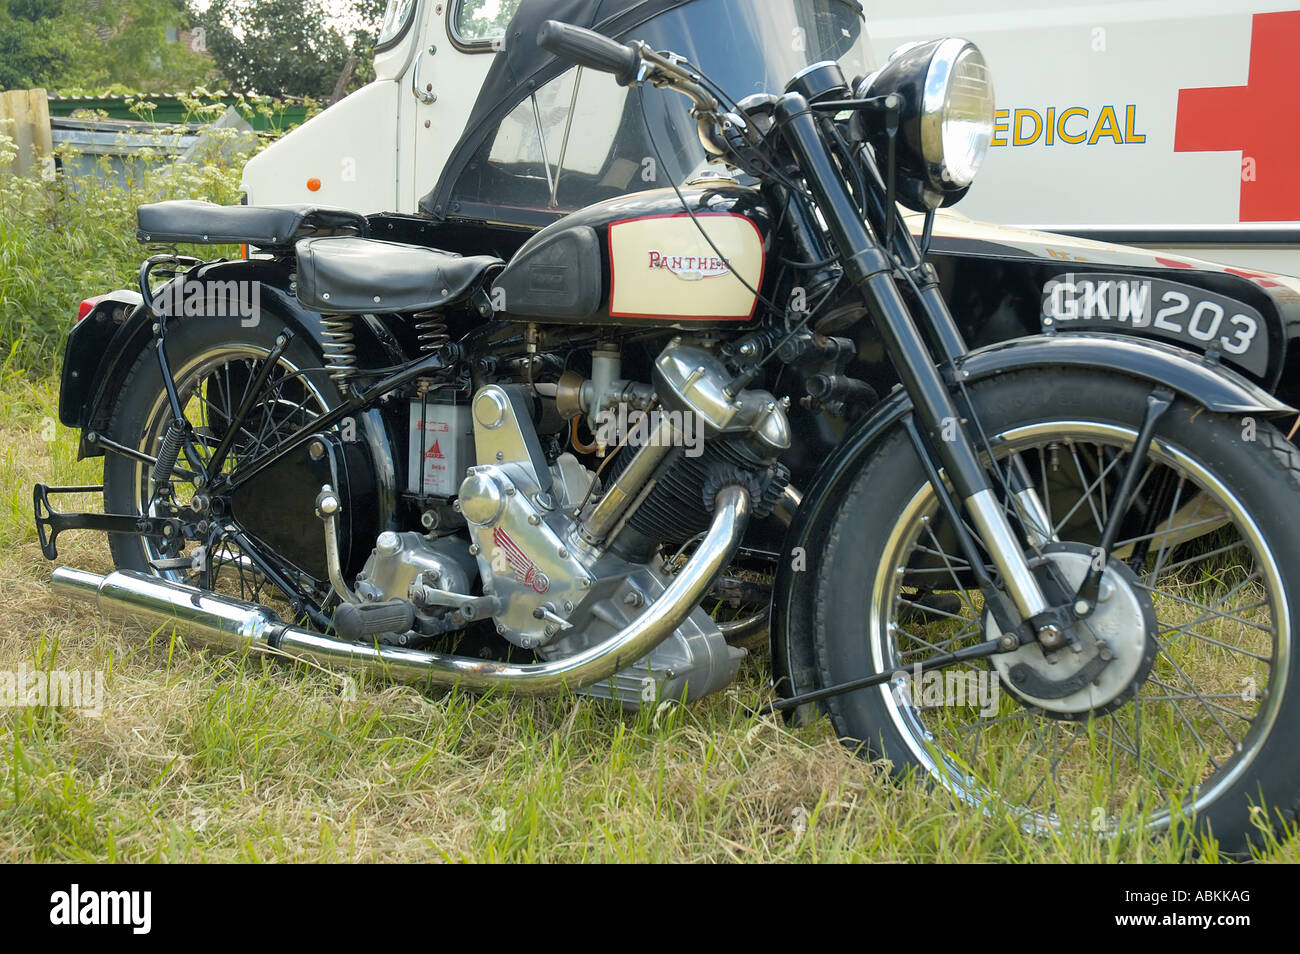 Panther Sloope 600cc Combo Stockfoto